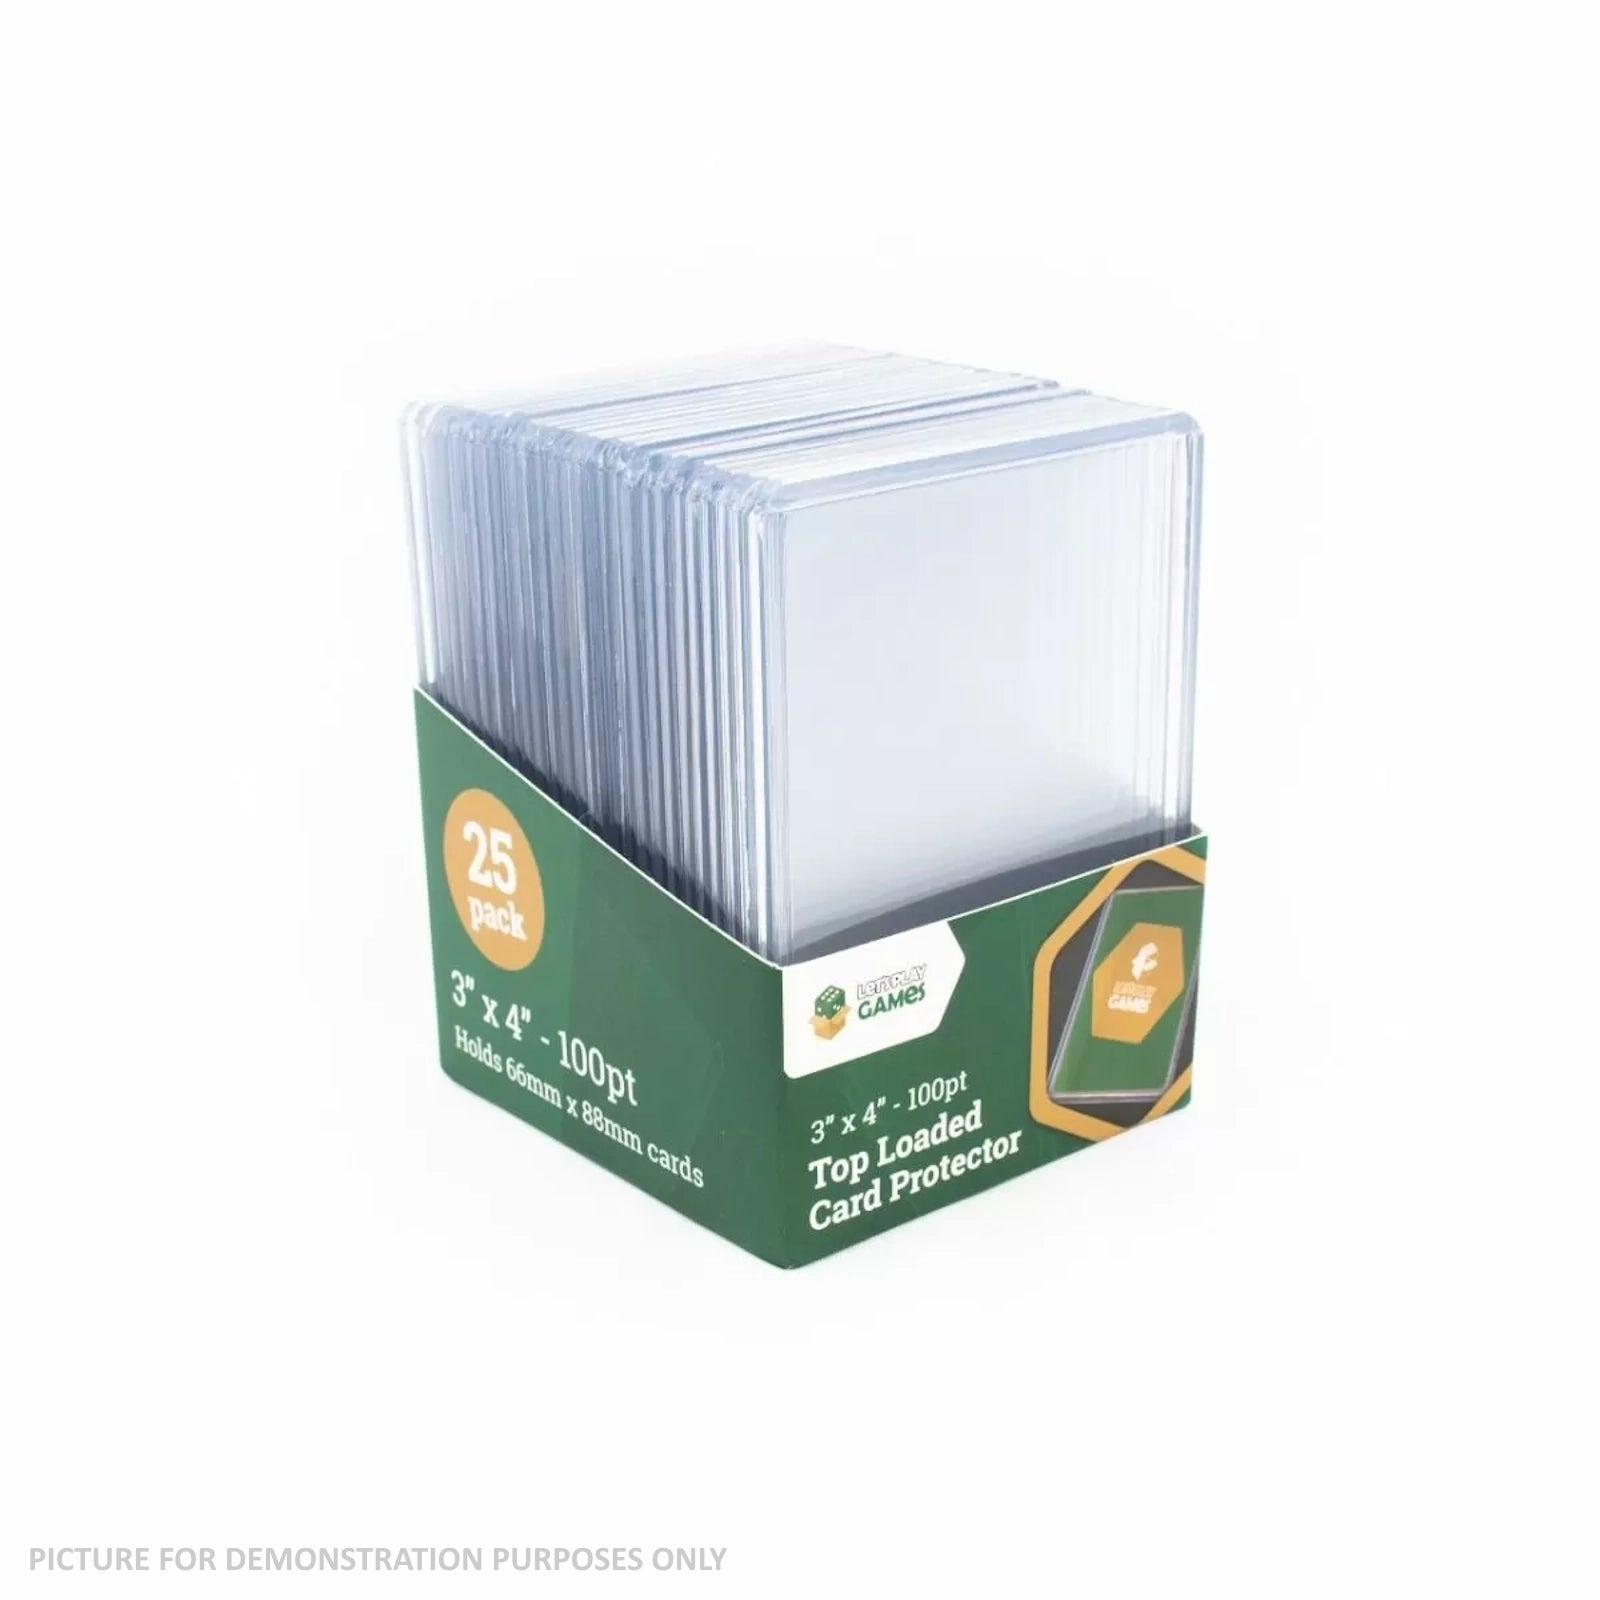 LPG 100pt Top Loaded Card Protector 3"x4" - PACK OF 25